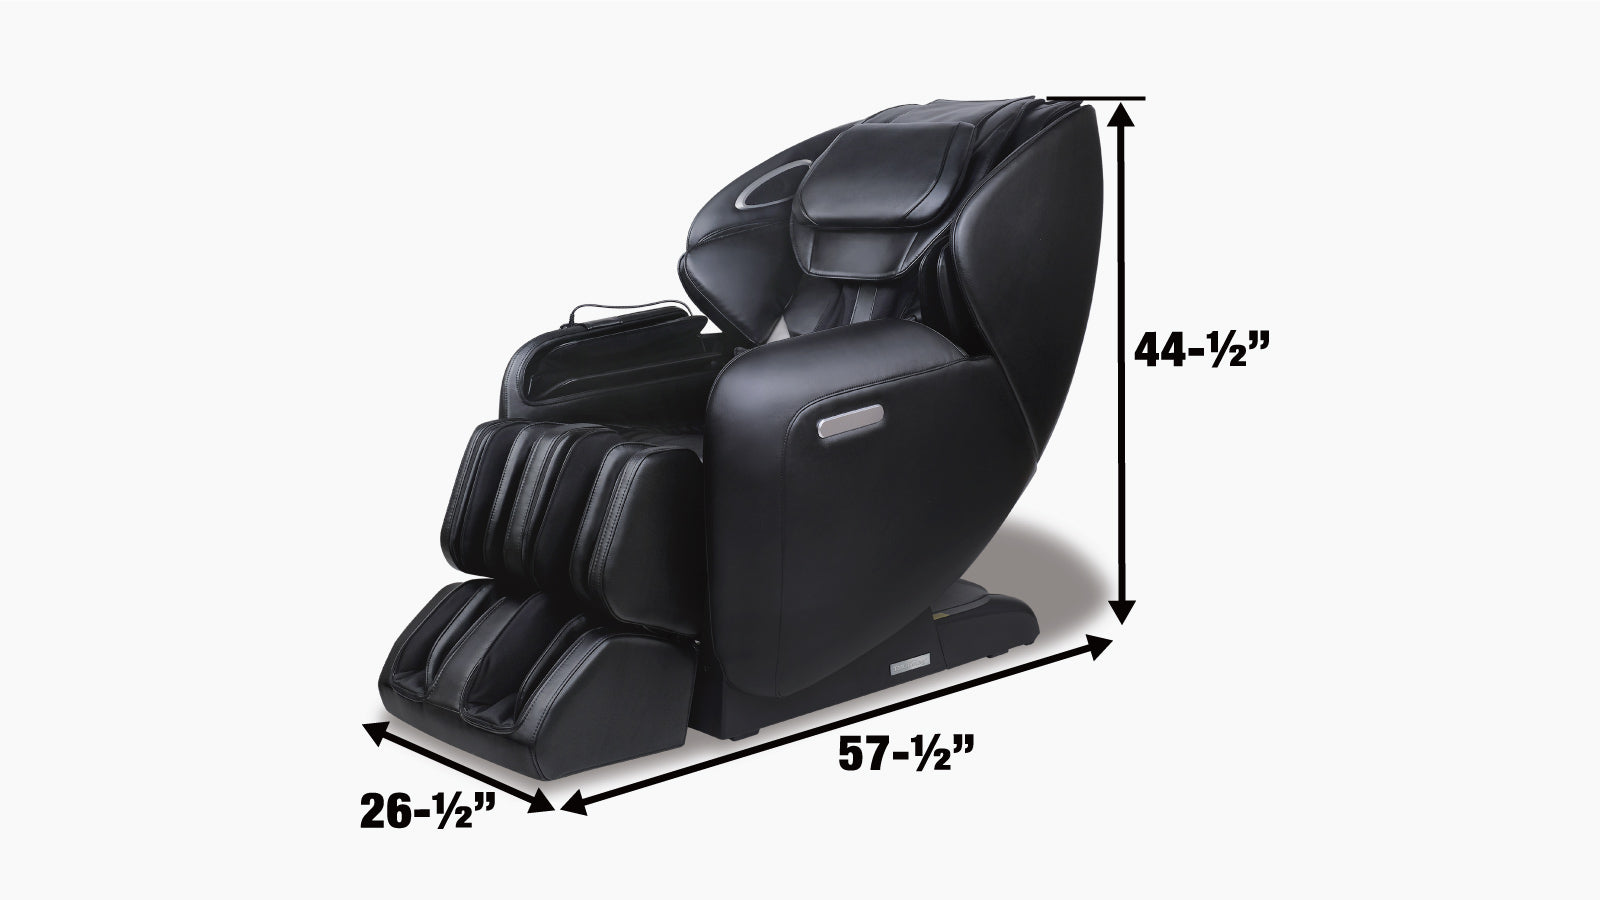 TMG Industrial Zero Gravity Multi-Function Massage Chair Recliner, 2D Mechanism, 6 Auto Programs, Remote Control, Full Body Compression, Bluetooth Speakers, Body Scanning, Footrest Extension, Roller Foot Massager TMG-LMC68-specifications-image